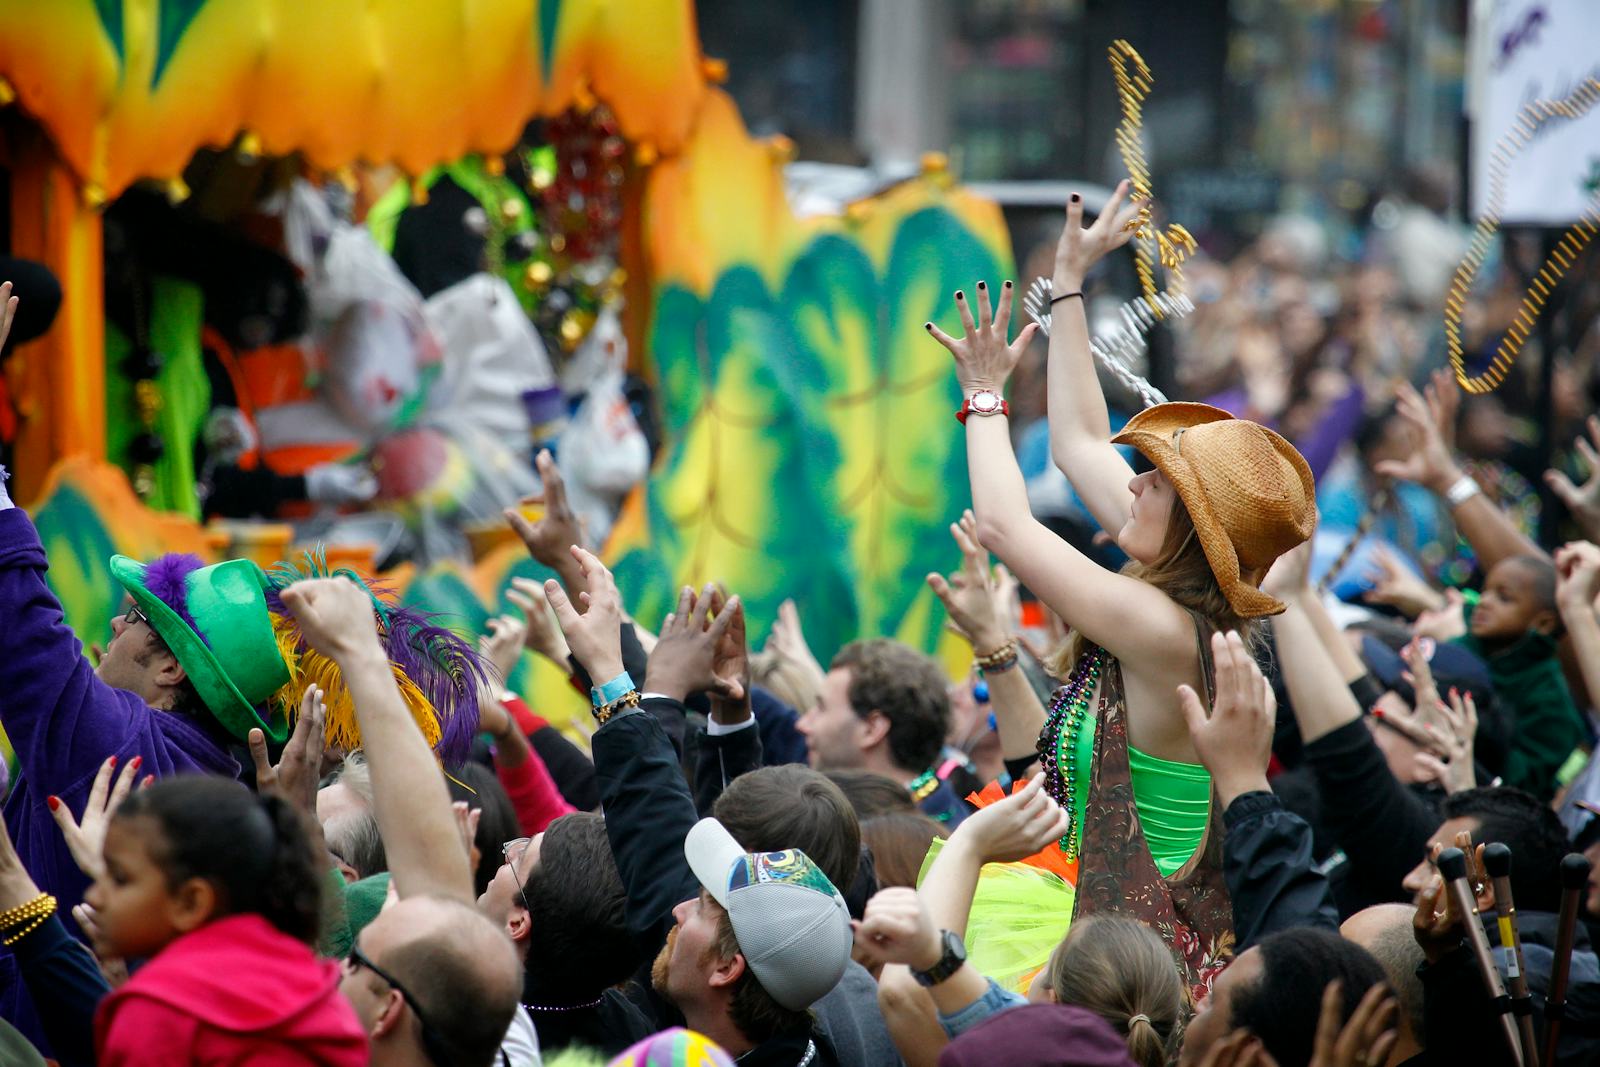 Why Do Women Flash Their Breasts For Beads At Mardi Gras? A Brief History